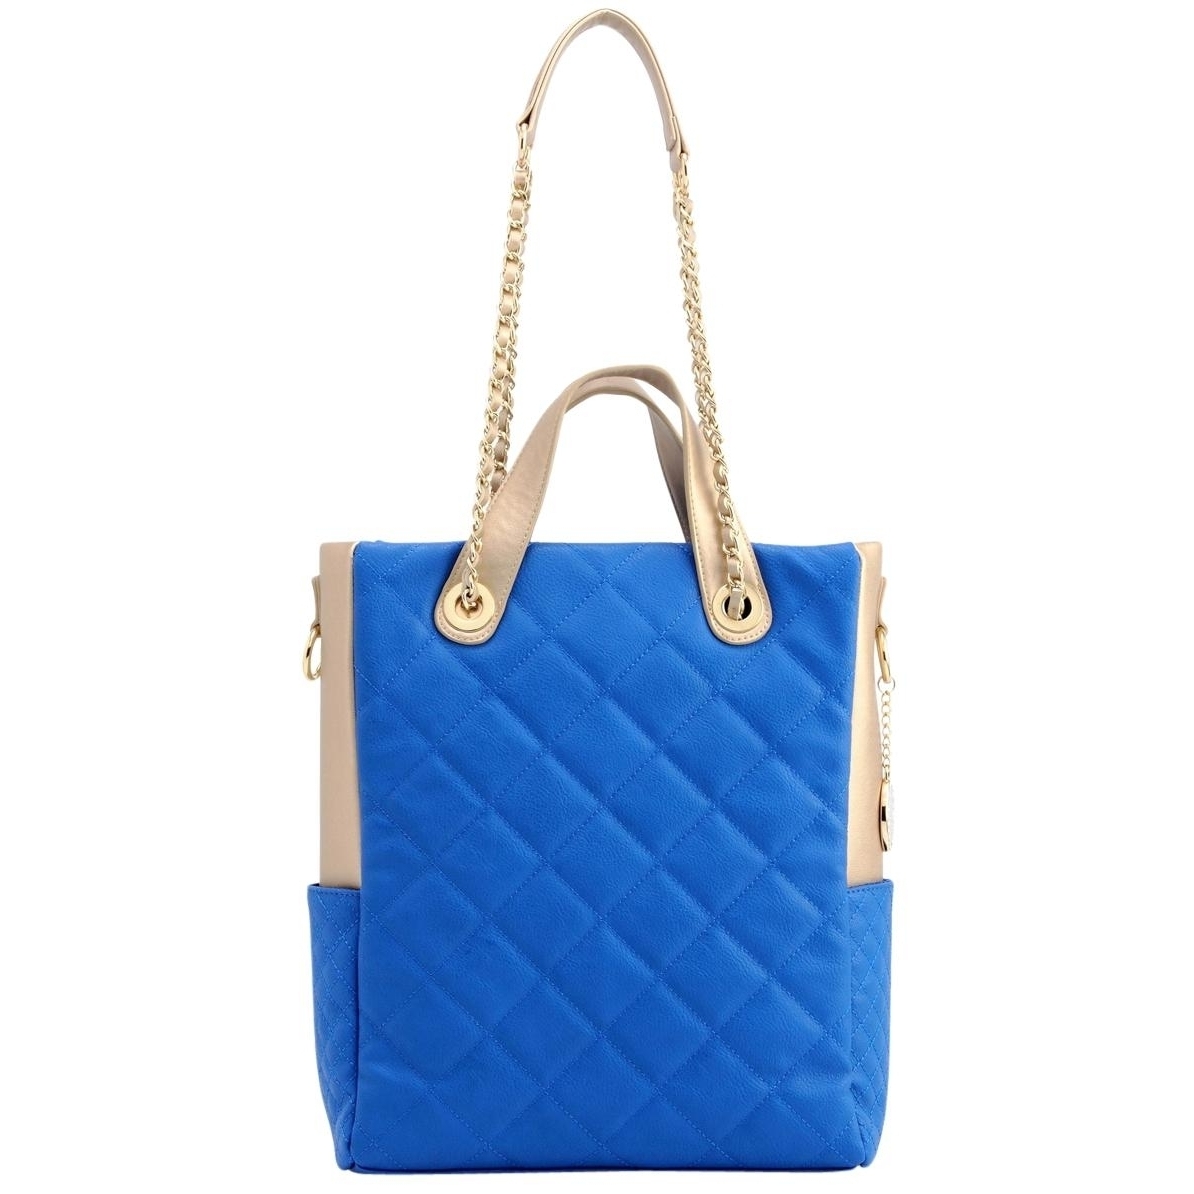 SCORE!'s Kat Travel Tote For Business, Work, Or School Quilted Shoulder Bag - Imperial Royal Blue And Gold Gold